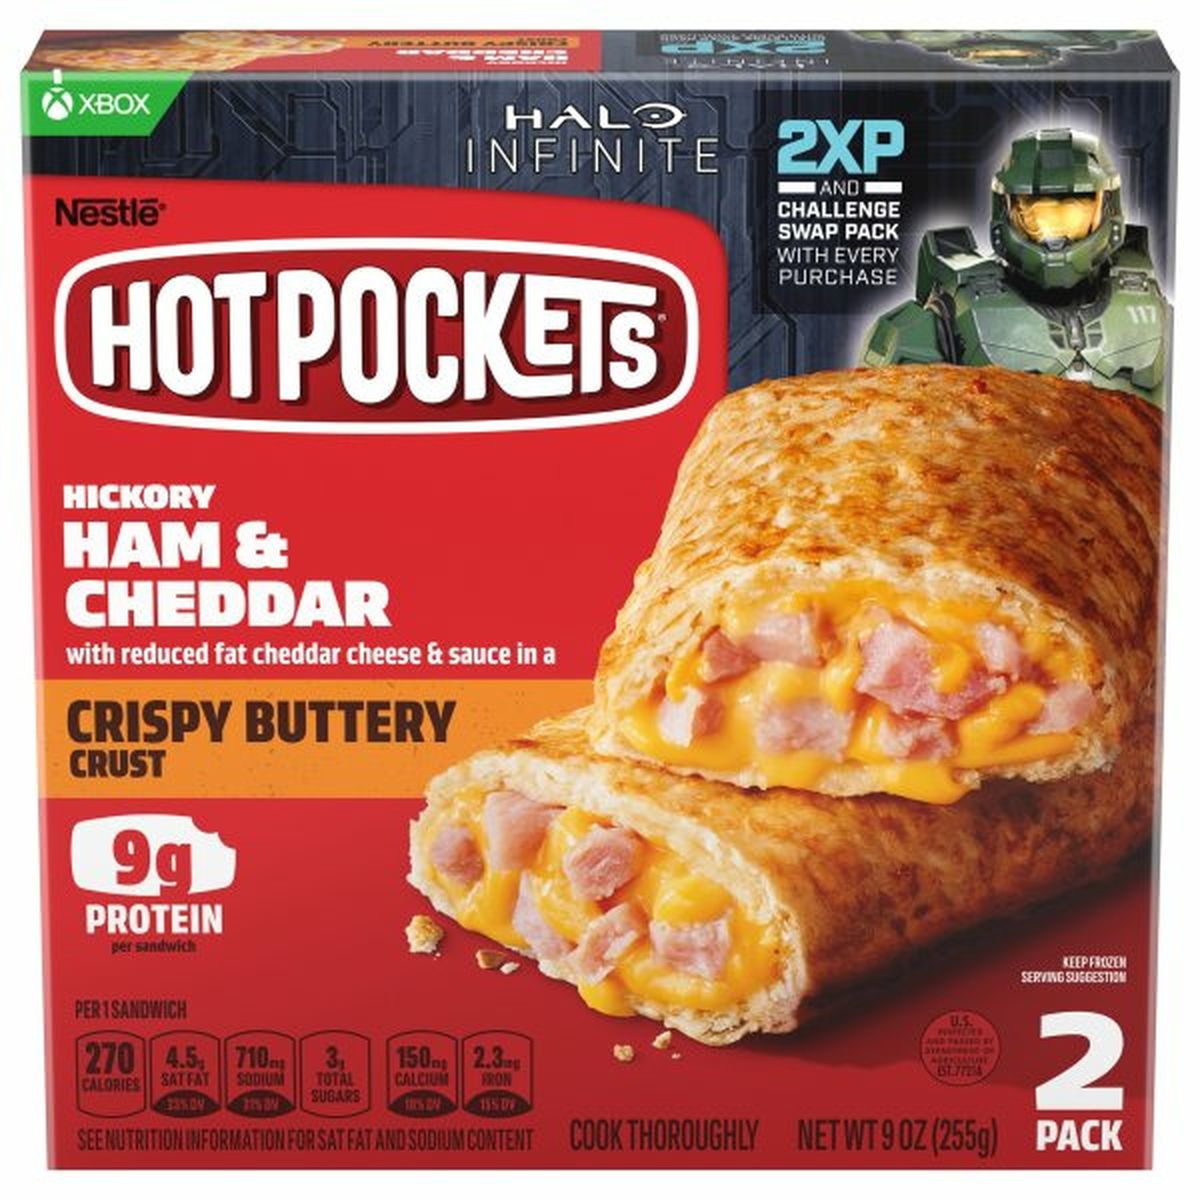 Calories in Hot Pockets Sandwiches, Ham & Cheddar, Hickory, Crispy Buttery Crust, 2 Pack